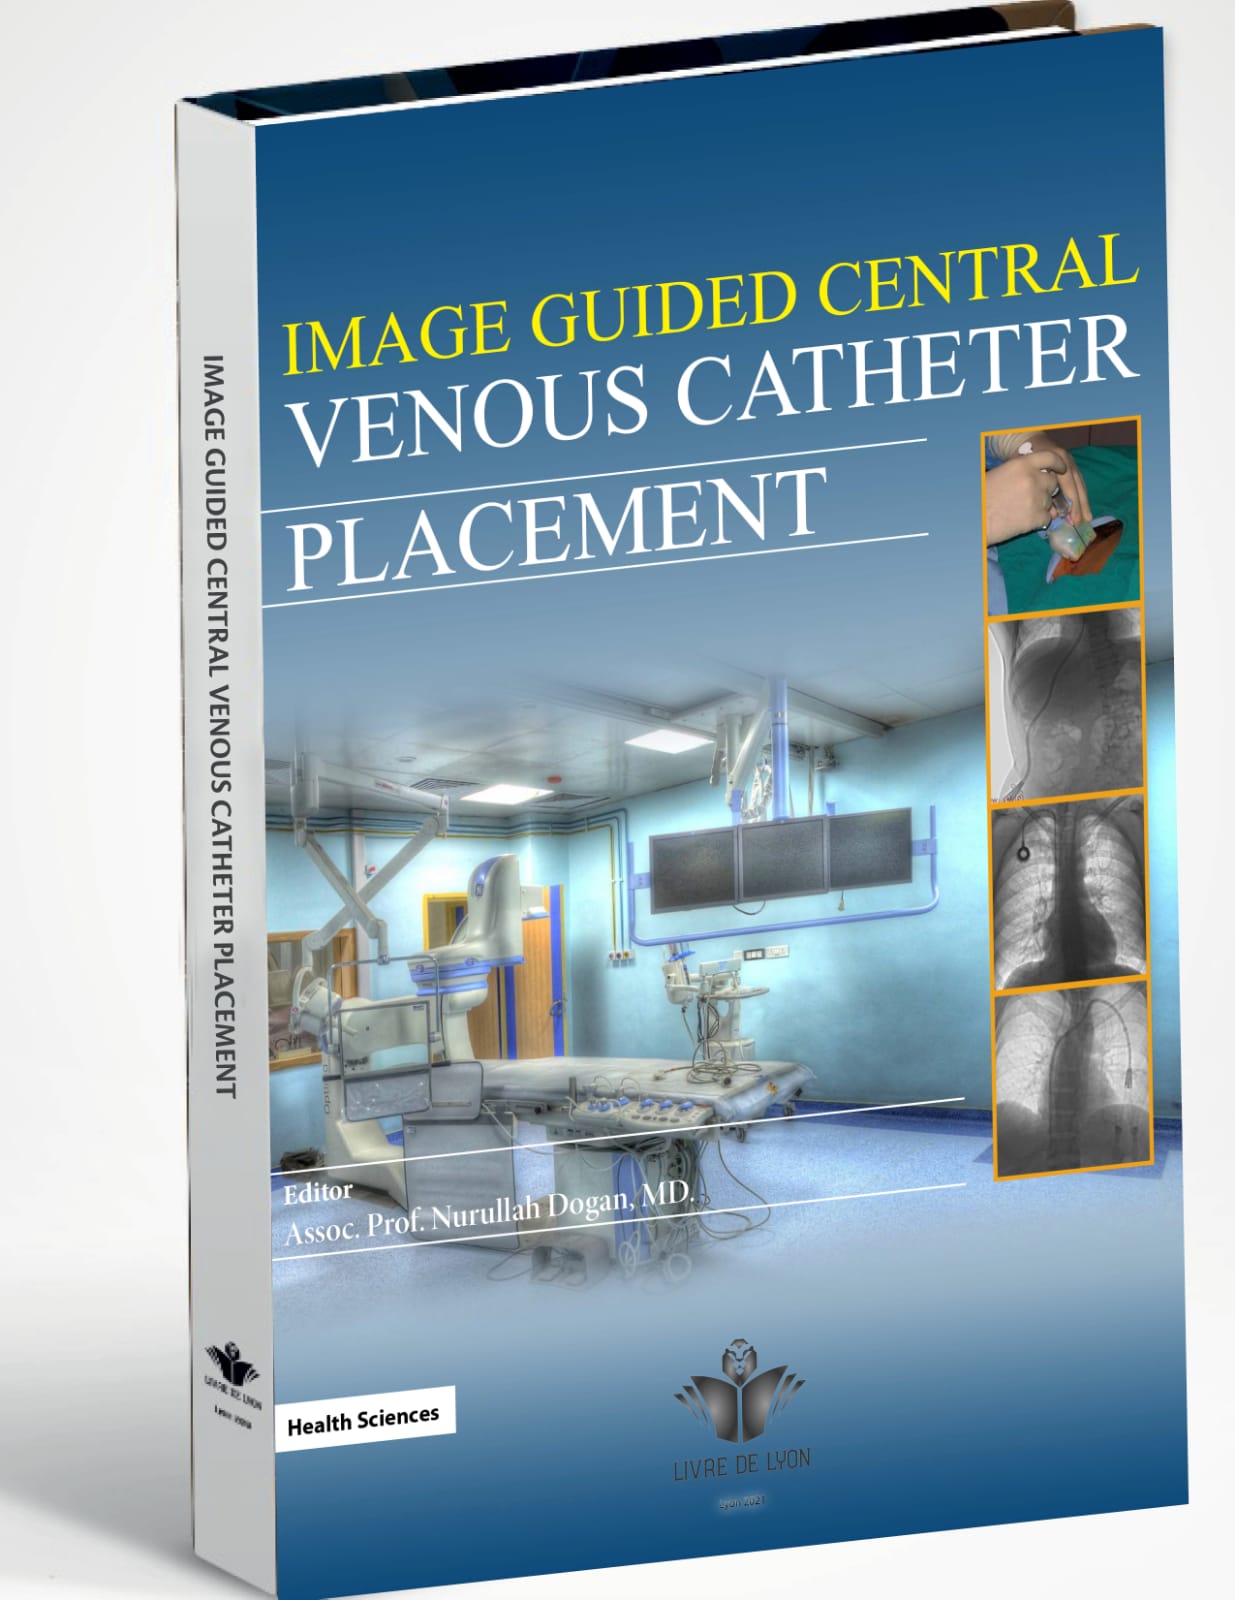 Image Guided Central Venous Catheter Placement